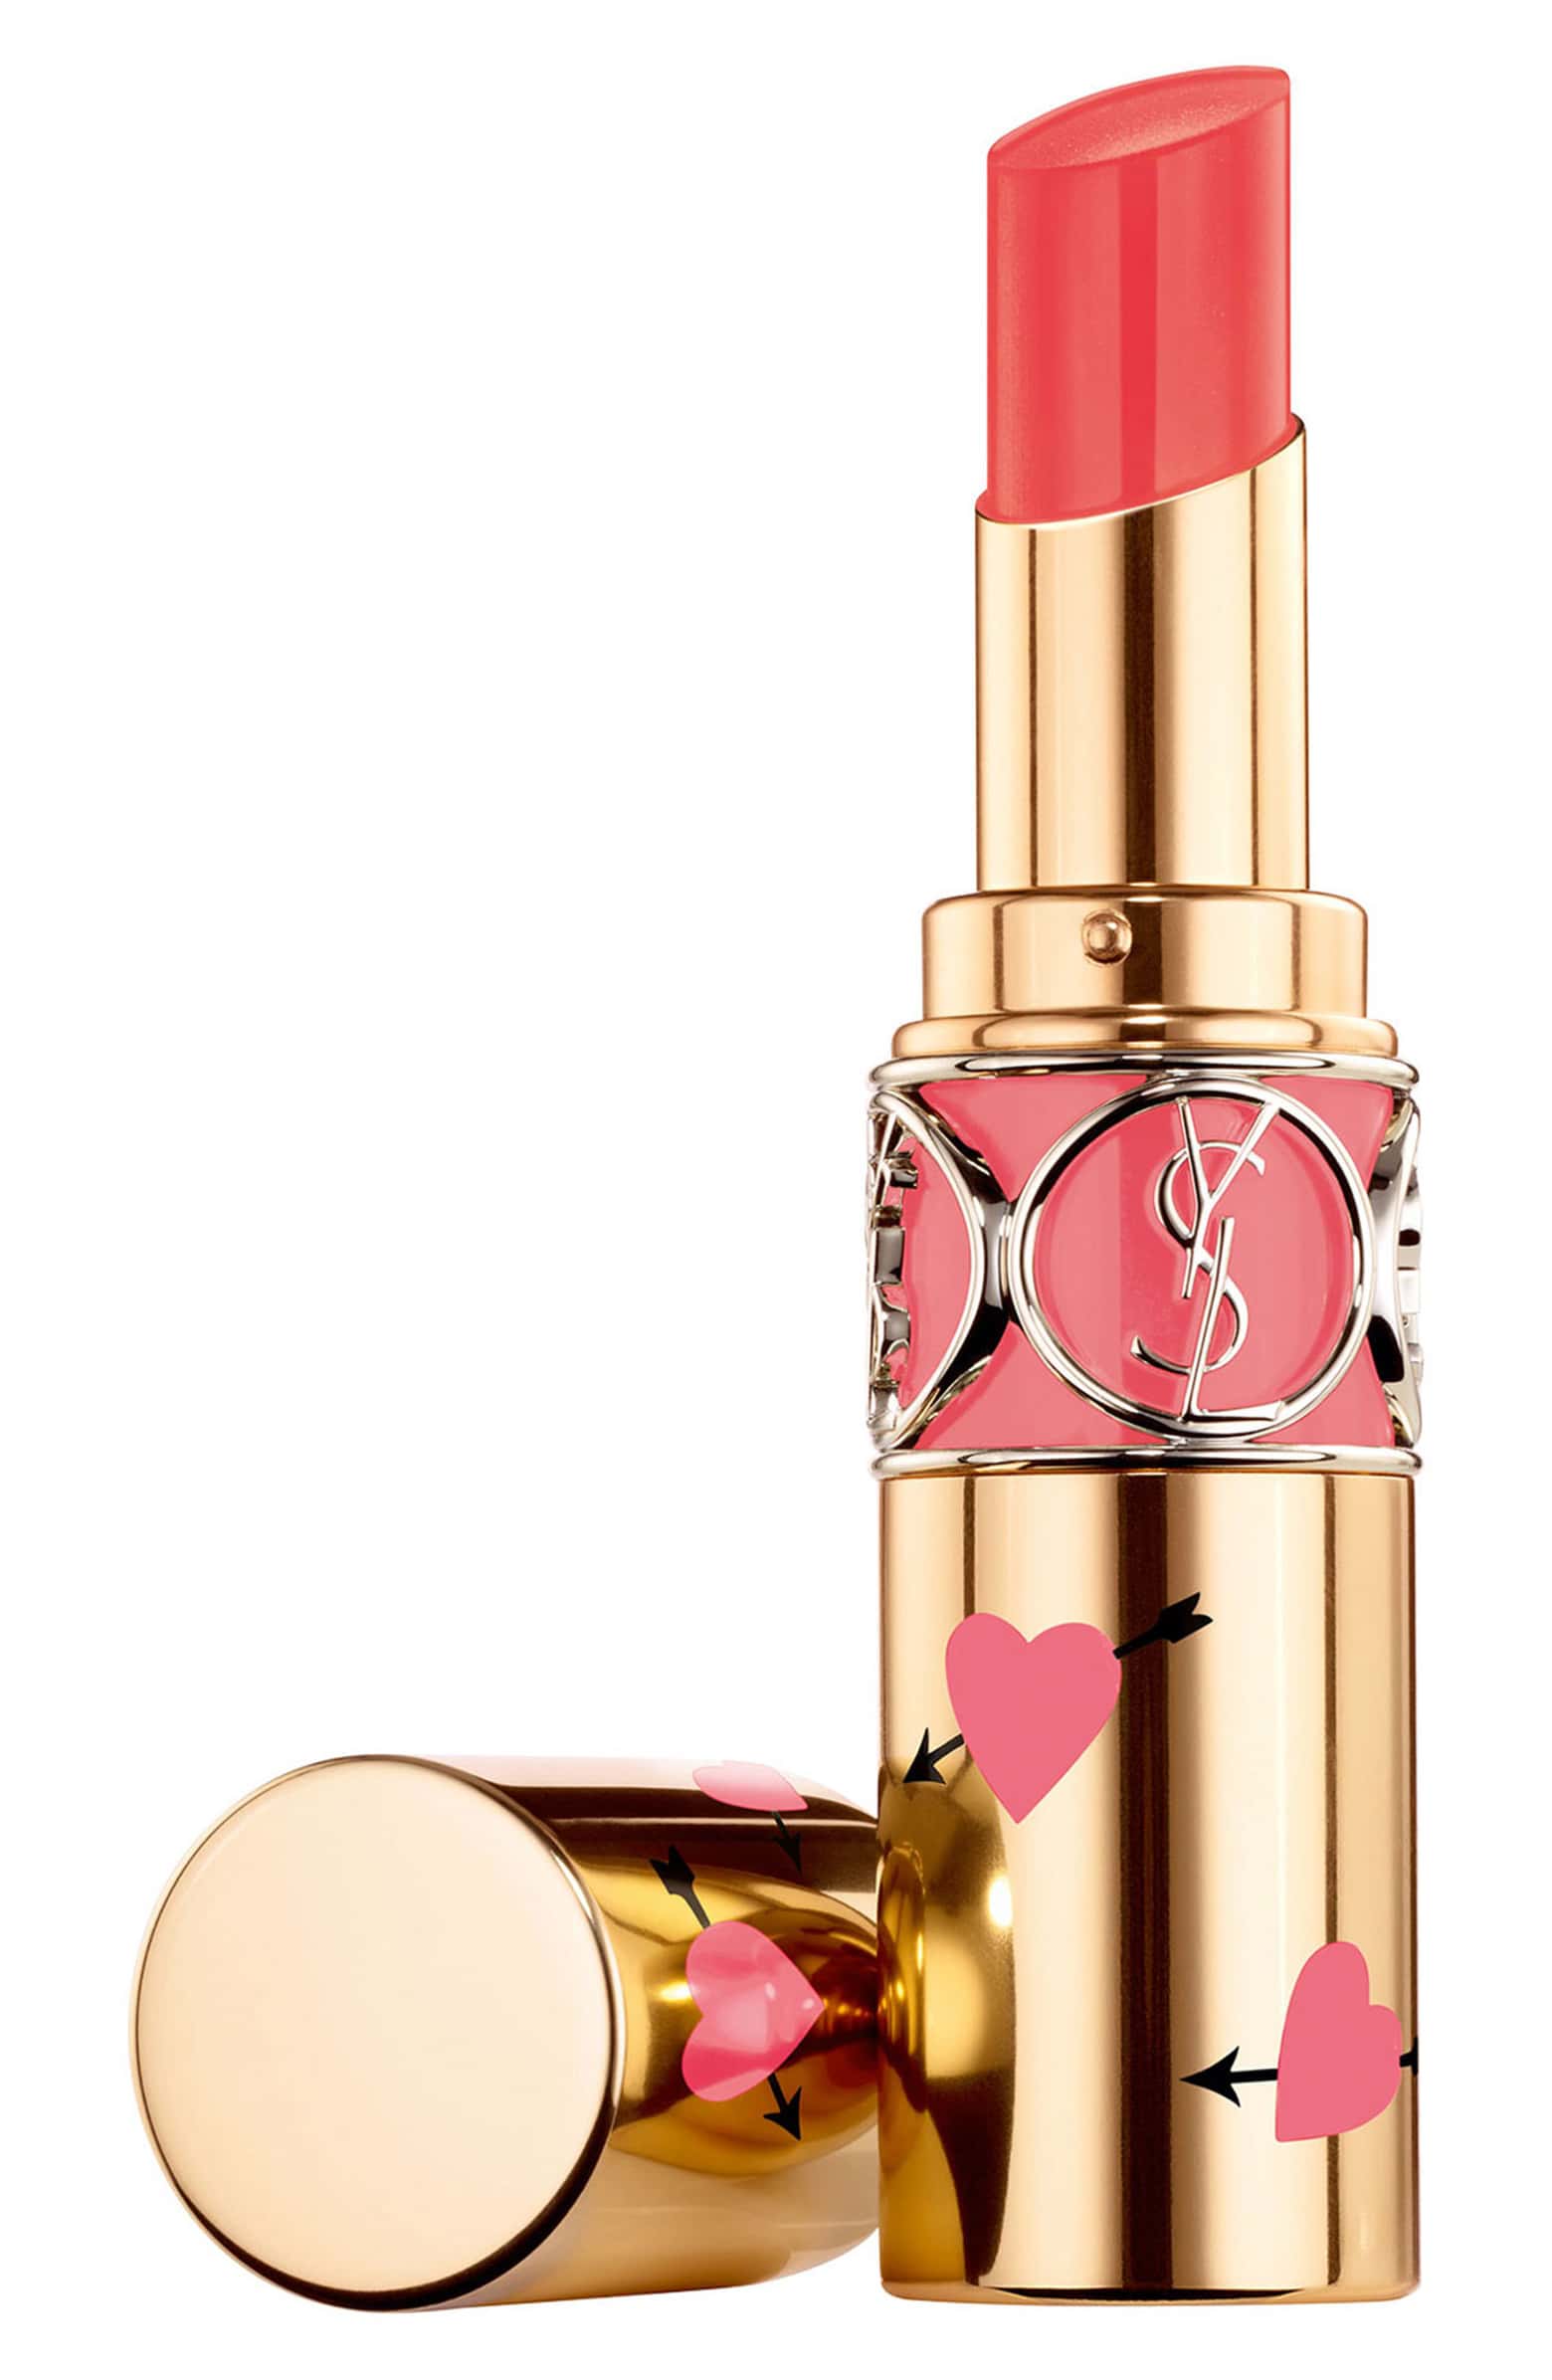 Lovely Living Coral accessories to celebrate the 2019 Pantone color of the year: YSL coral lipstick | Nordstrom